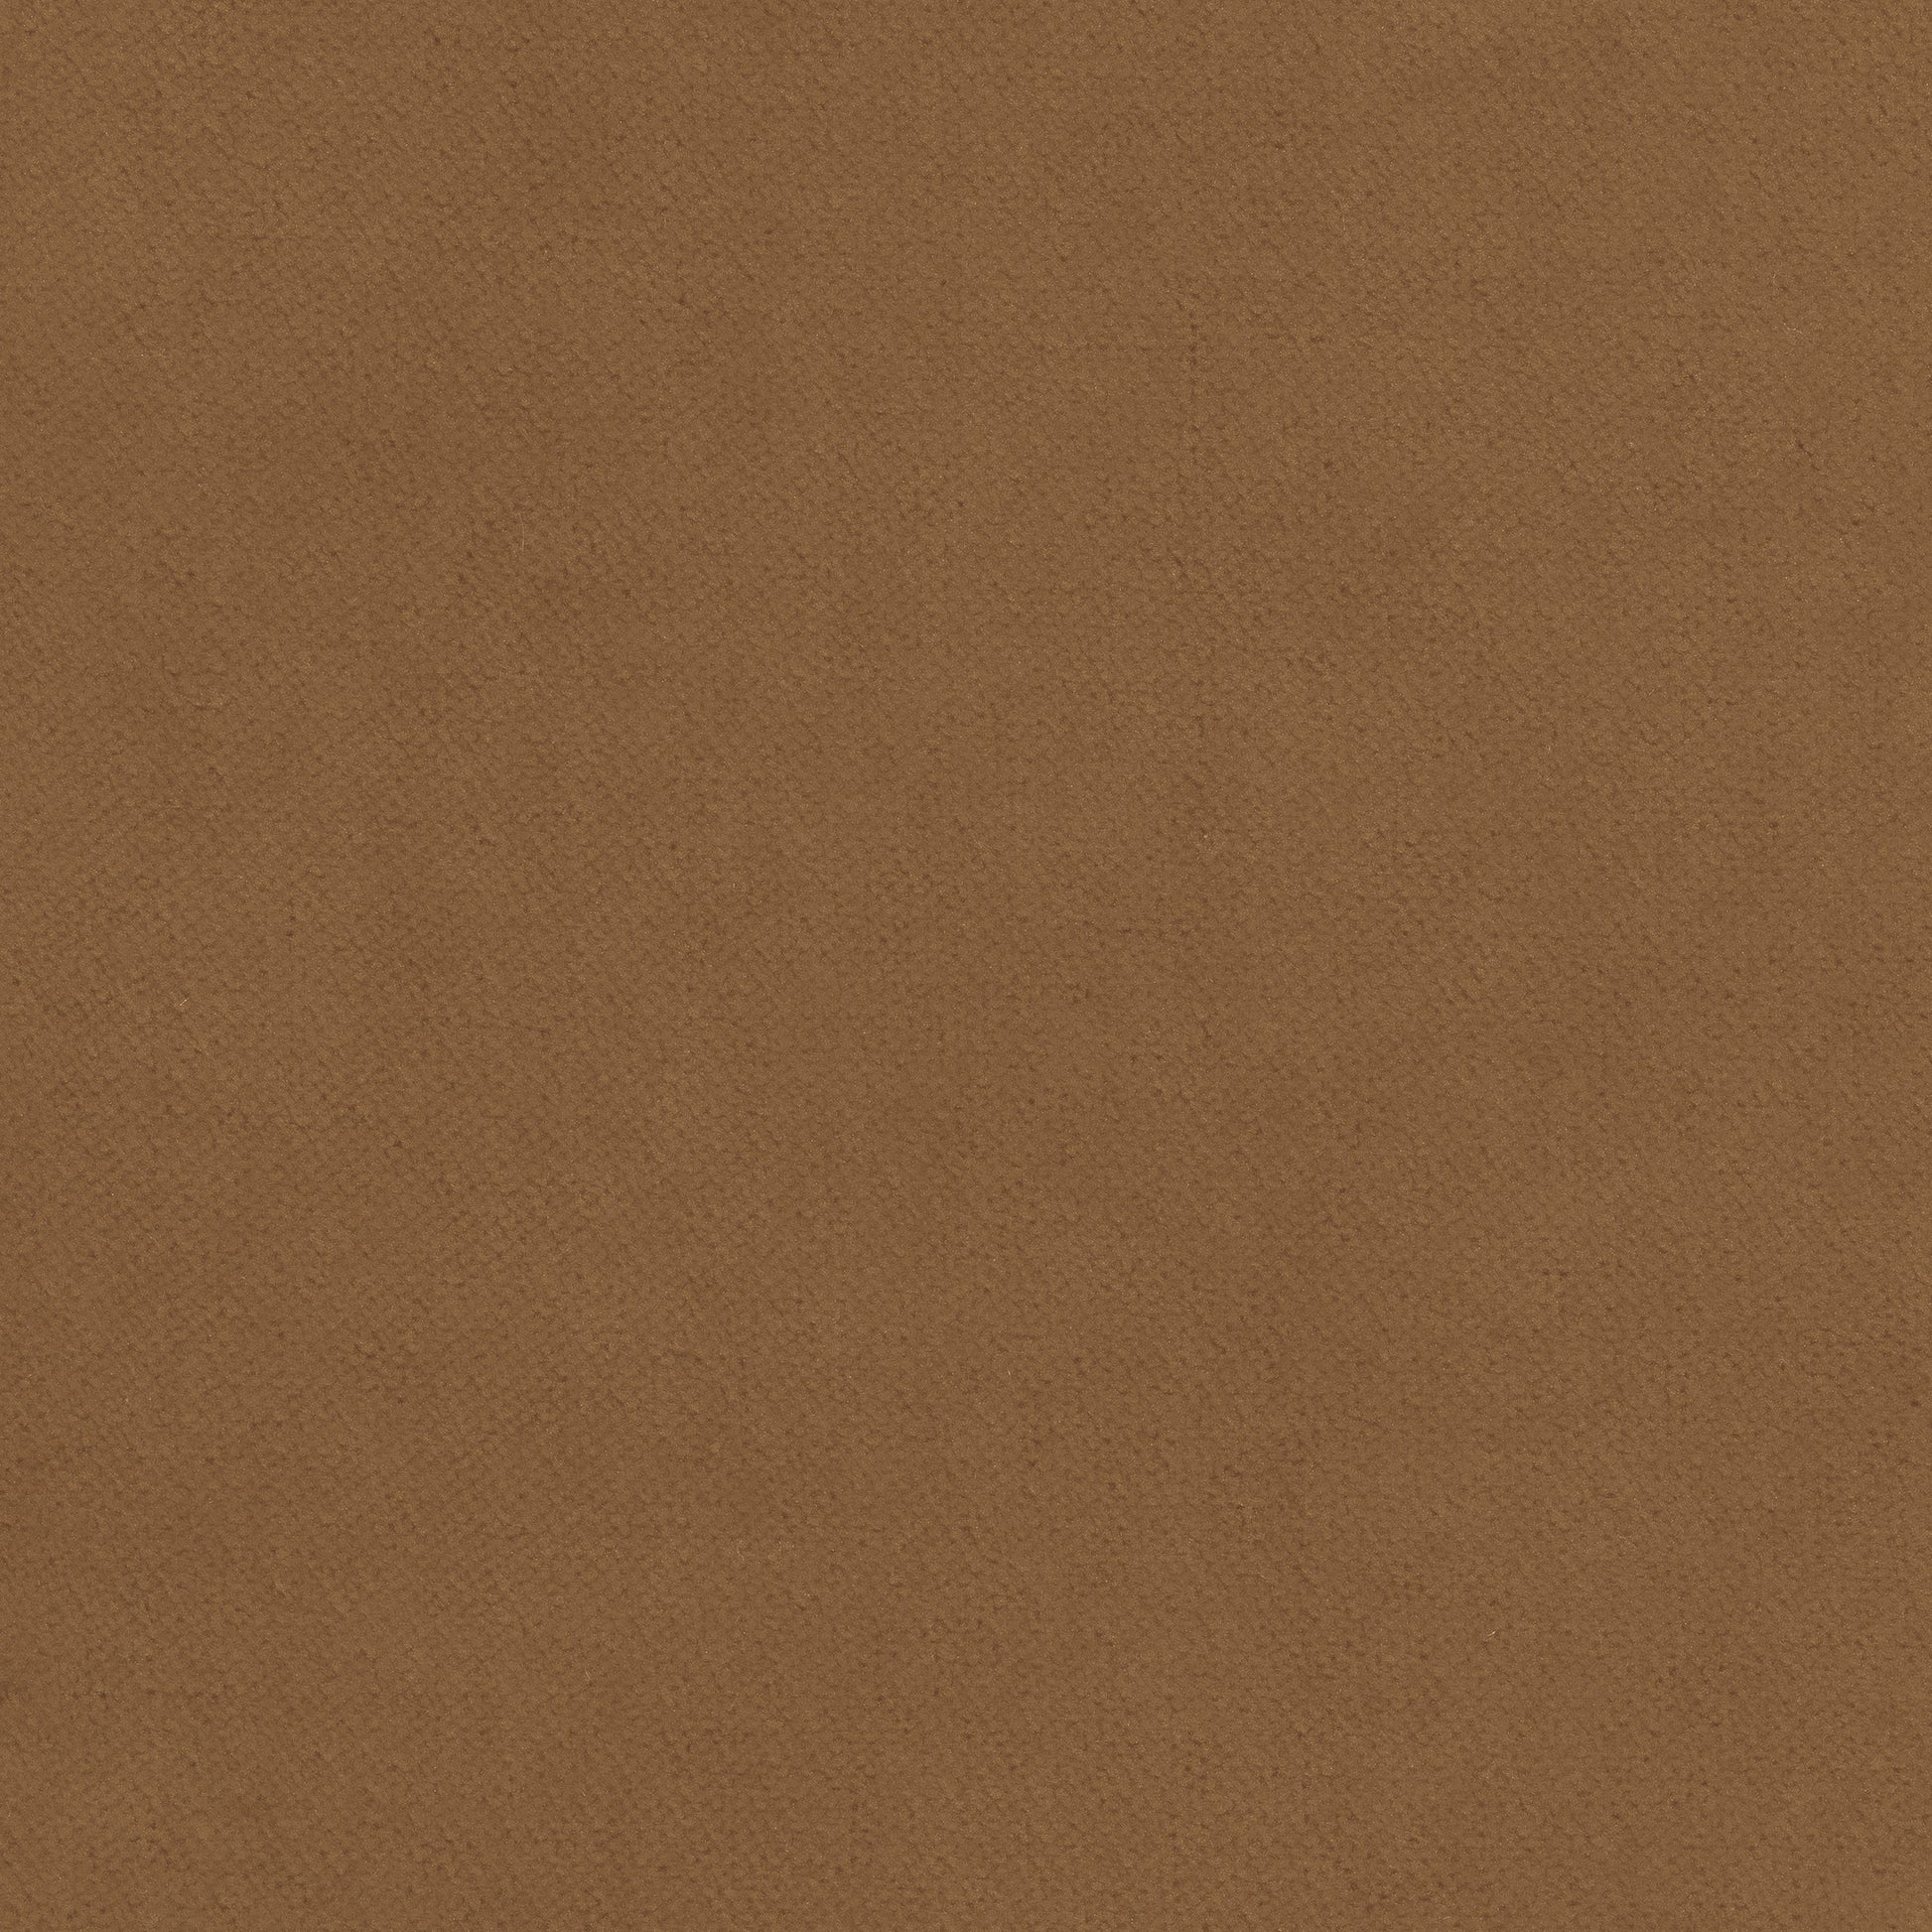 Purchase Thibaut Fabric Pattern# W7230 pattern name Club Velvet color Camel